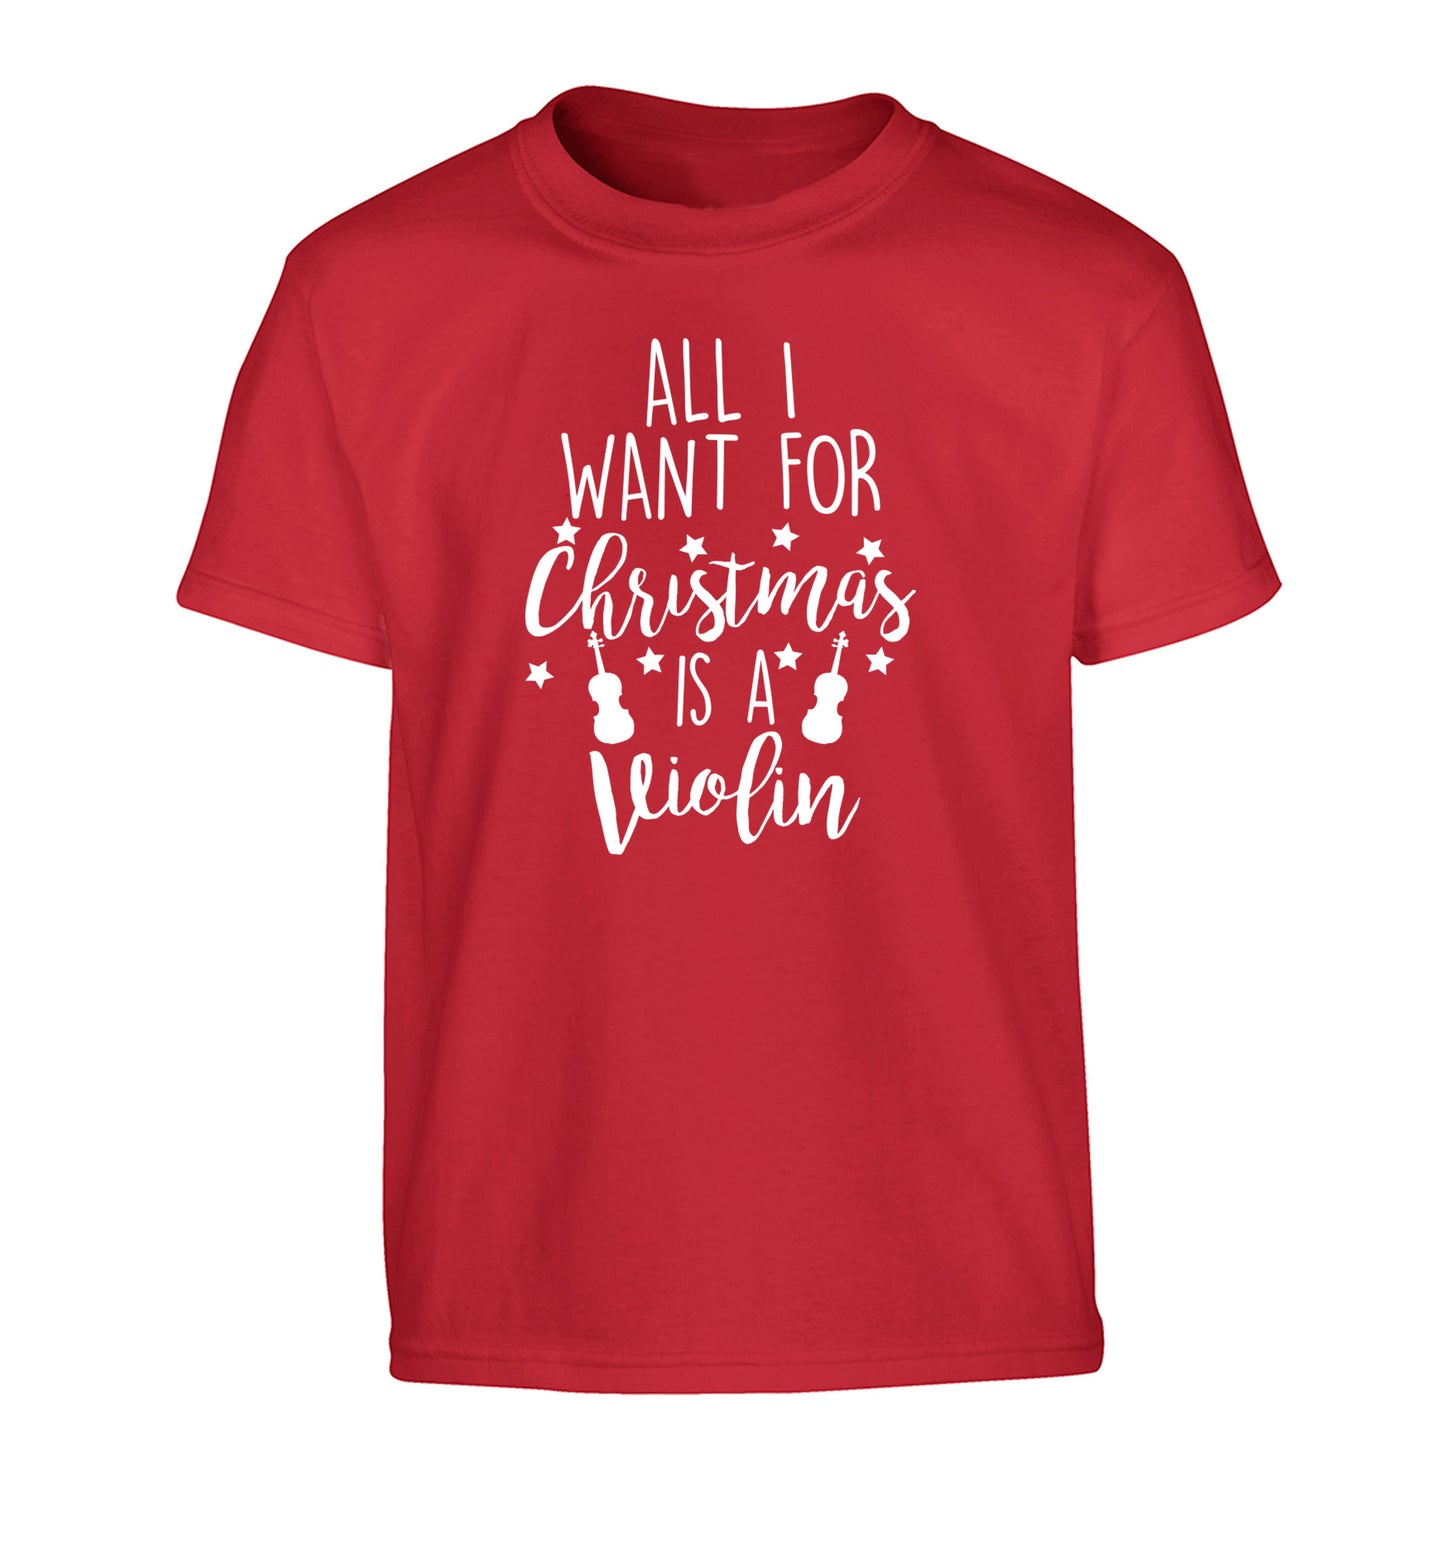 All I Want For Christmas is a Violin Children's red Tshirt 12-13 Years